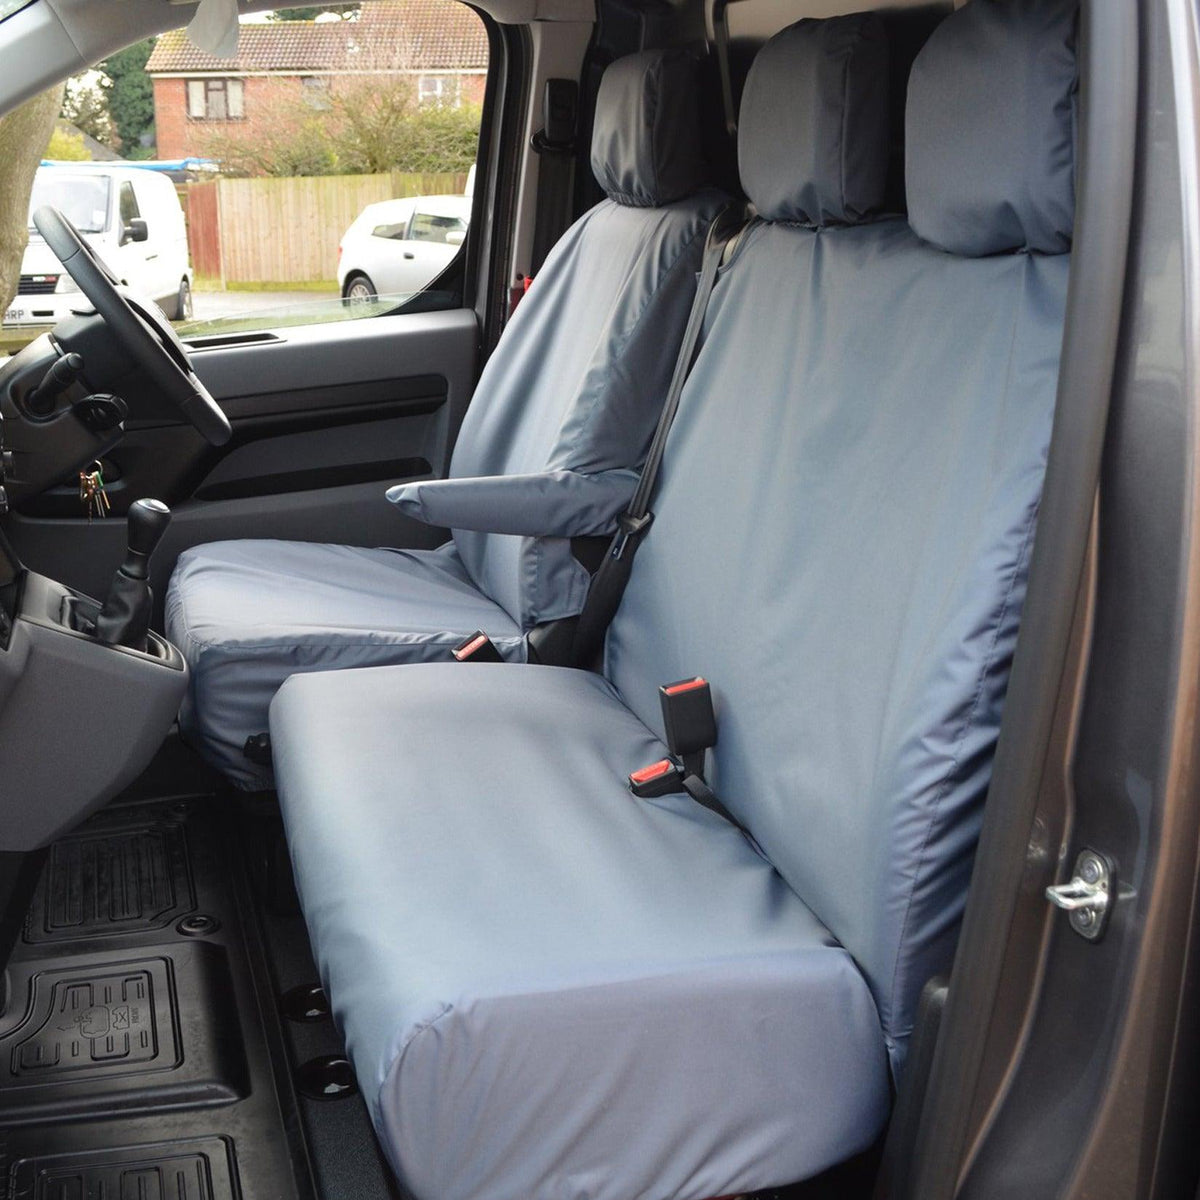 CITROEN DISPATCH VAN 2016 ON DRIVER'S SEAT AND NON-FOLDING DOUBLE PASSENGER (NO WORK TRAY, NON-SPLIT BASE) SEAT COVERS - GREY - Storm Xccessories2